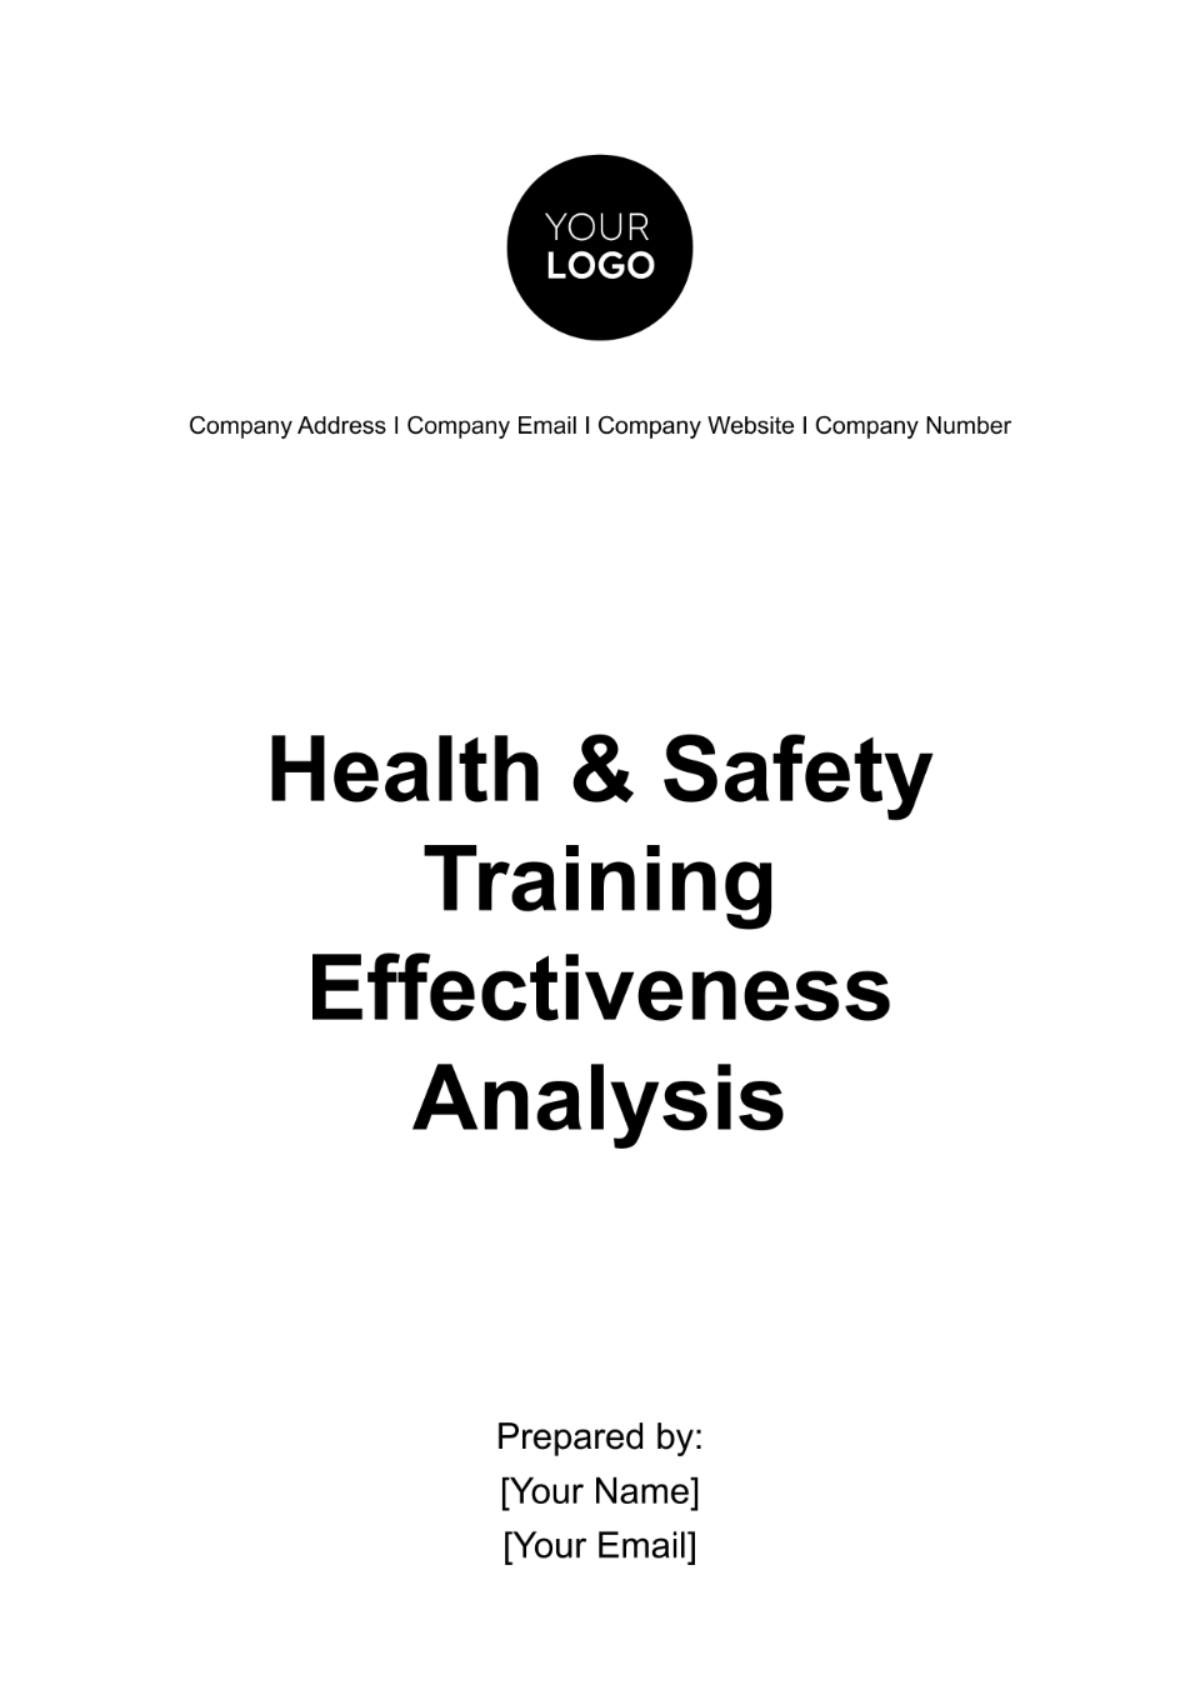 Free Health & Safety Training Effectiveness Analysis Template